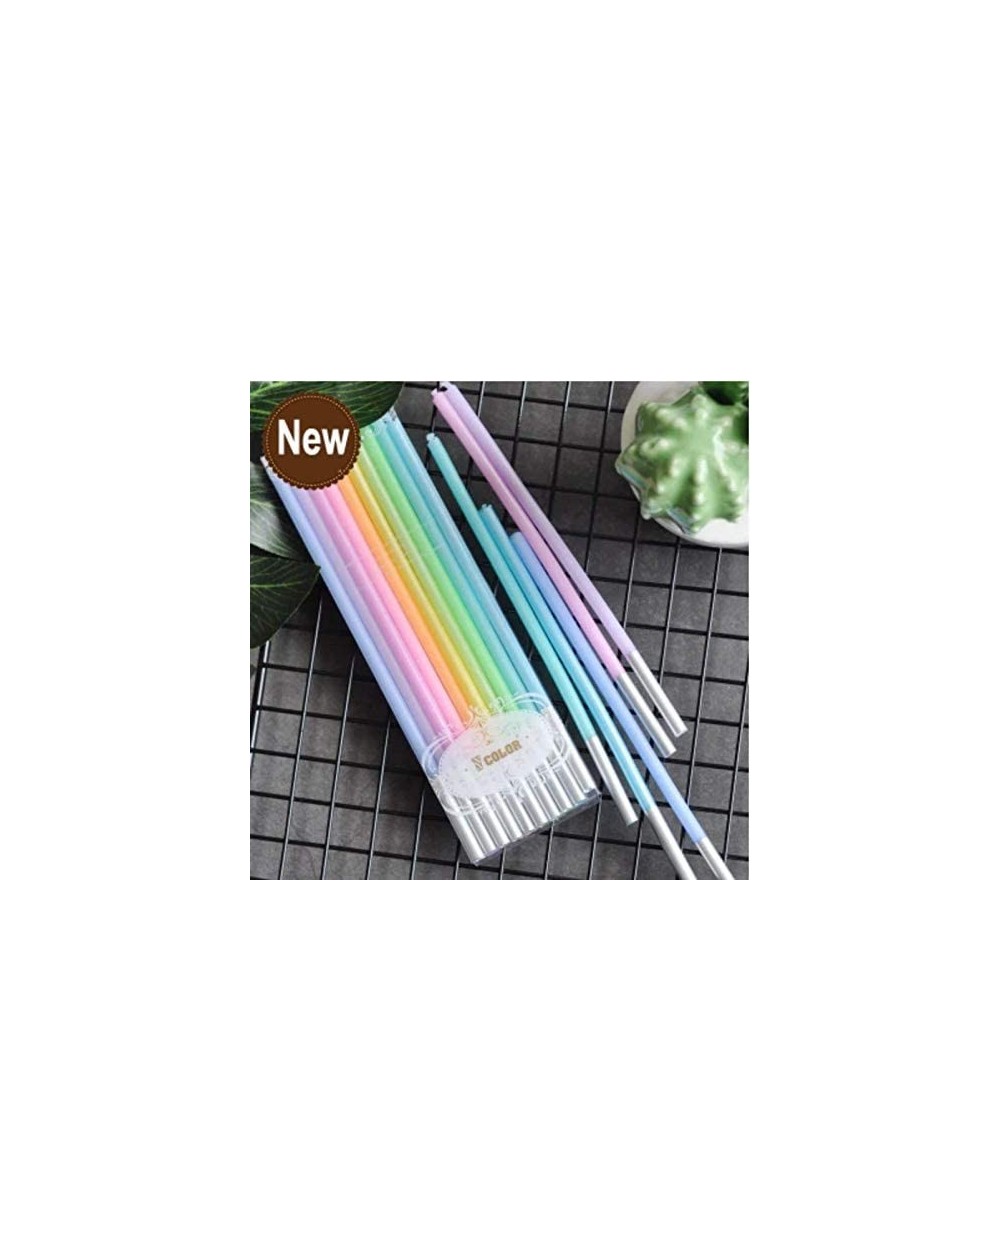 Birthday Candles Cutesy Cake Candles Neon Color Pastel Rainbow Birthday Candles in Holders for Party Wedding Birthday Cake De...